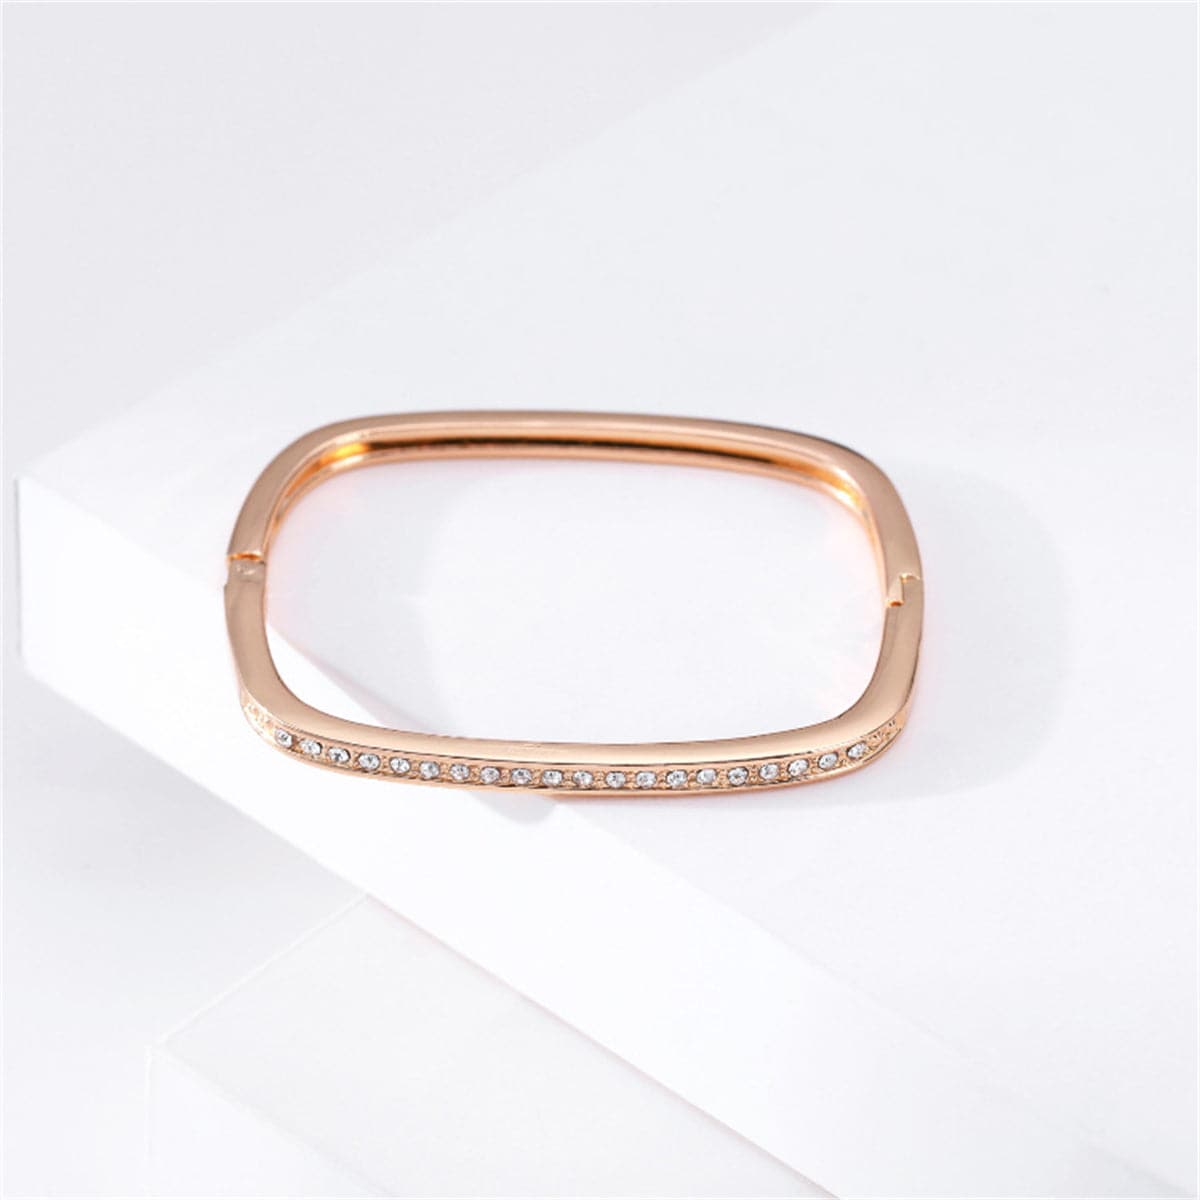 Cubic Zirconia & 18K Gold-Plated Thin Square Bangle